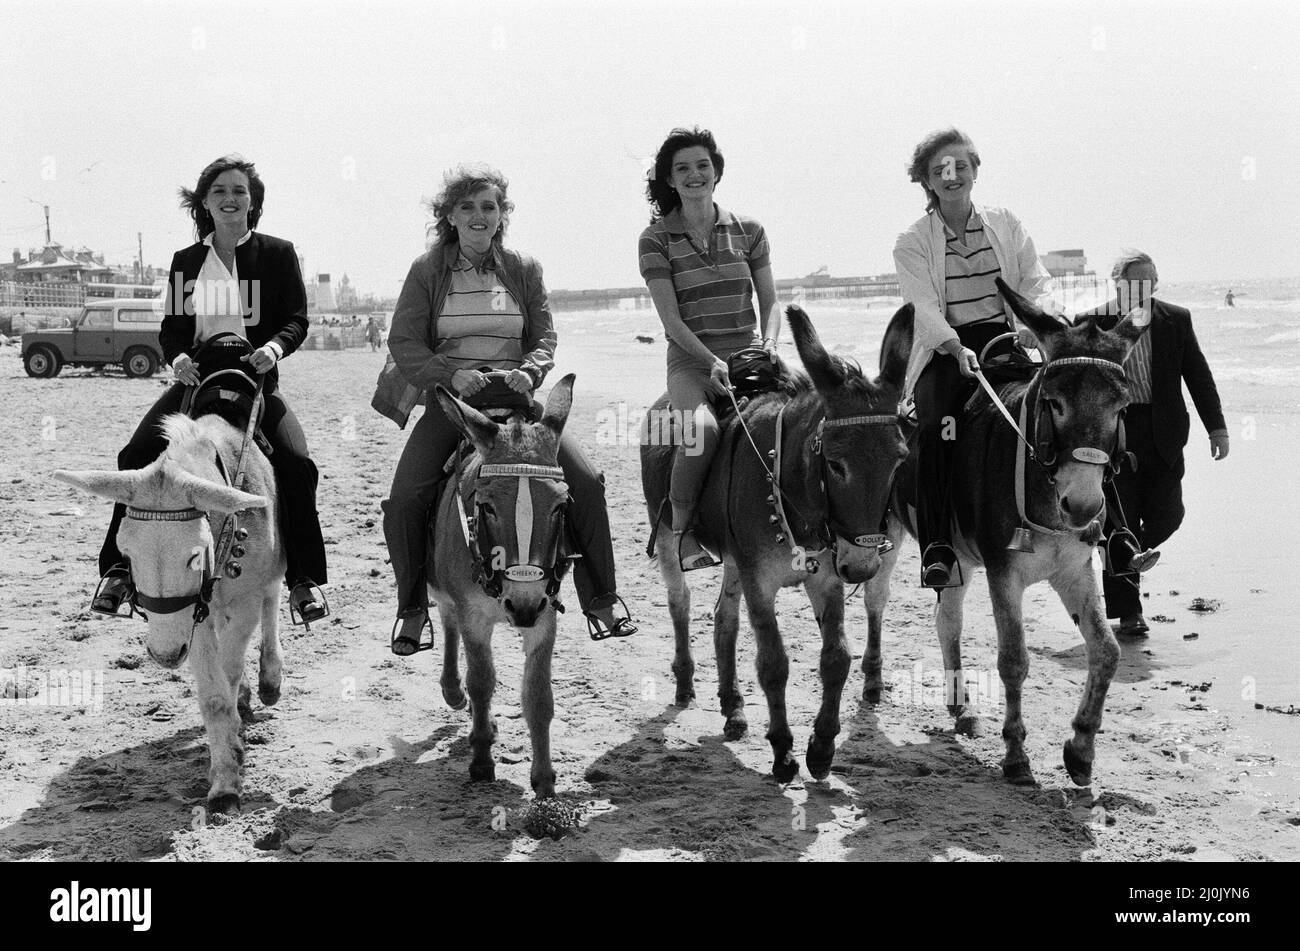 The Nolan sisters, who are appearing at the Winter Gardens, enjoy themselves riding donkeys on the sands at Blackpool. 17th July 1980. Stock Photo